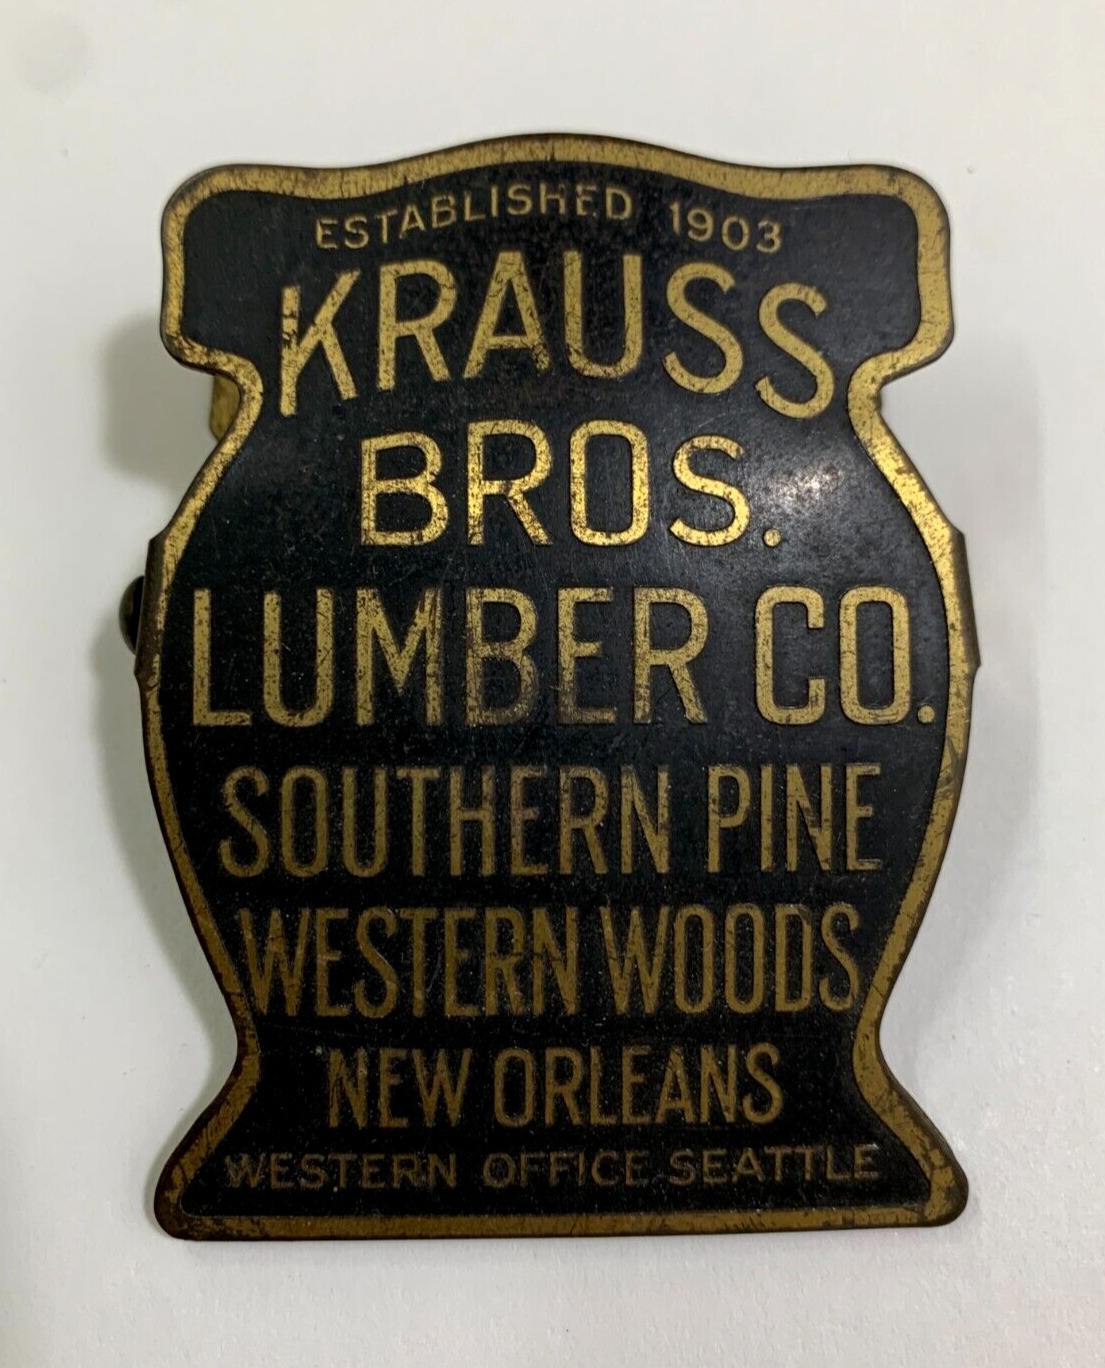 KRAUSS BROS. LUMBER CO. New Orleans vintage advertising clip. Made by Etching Co